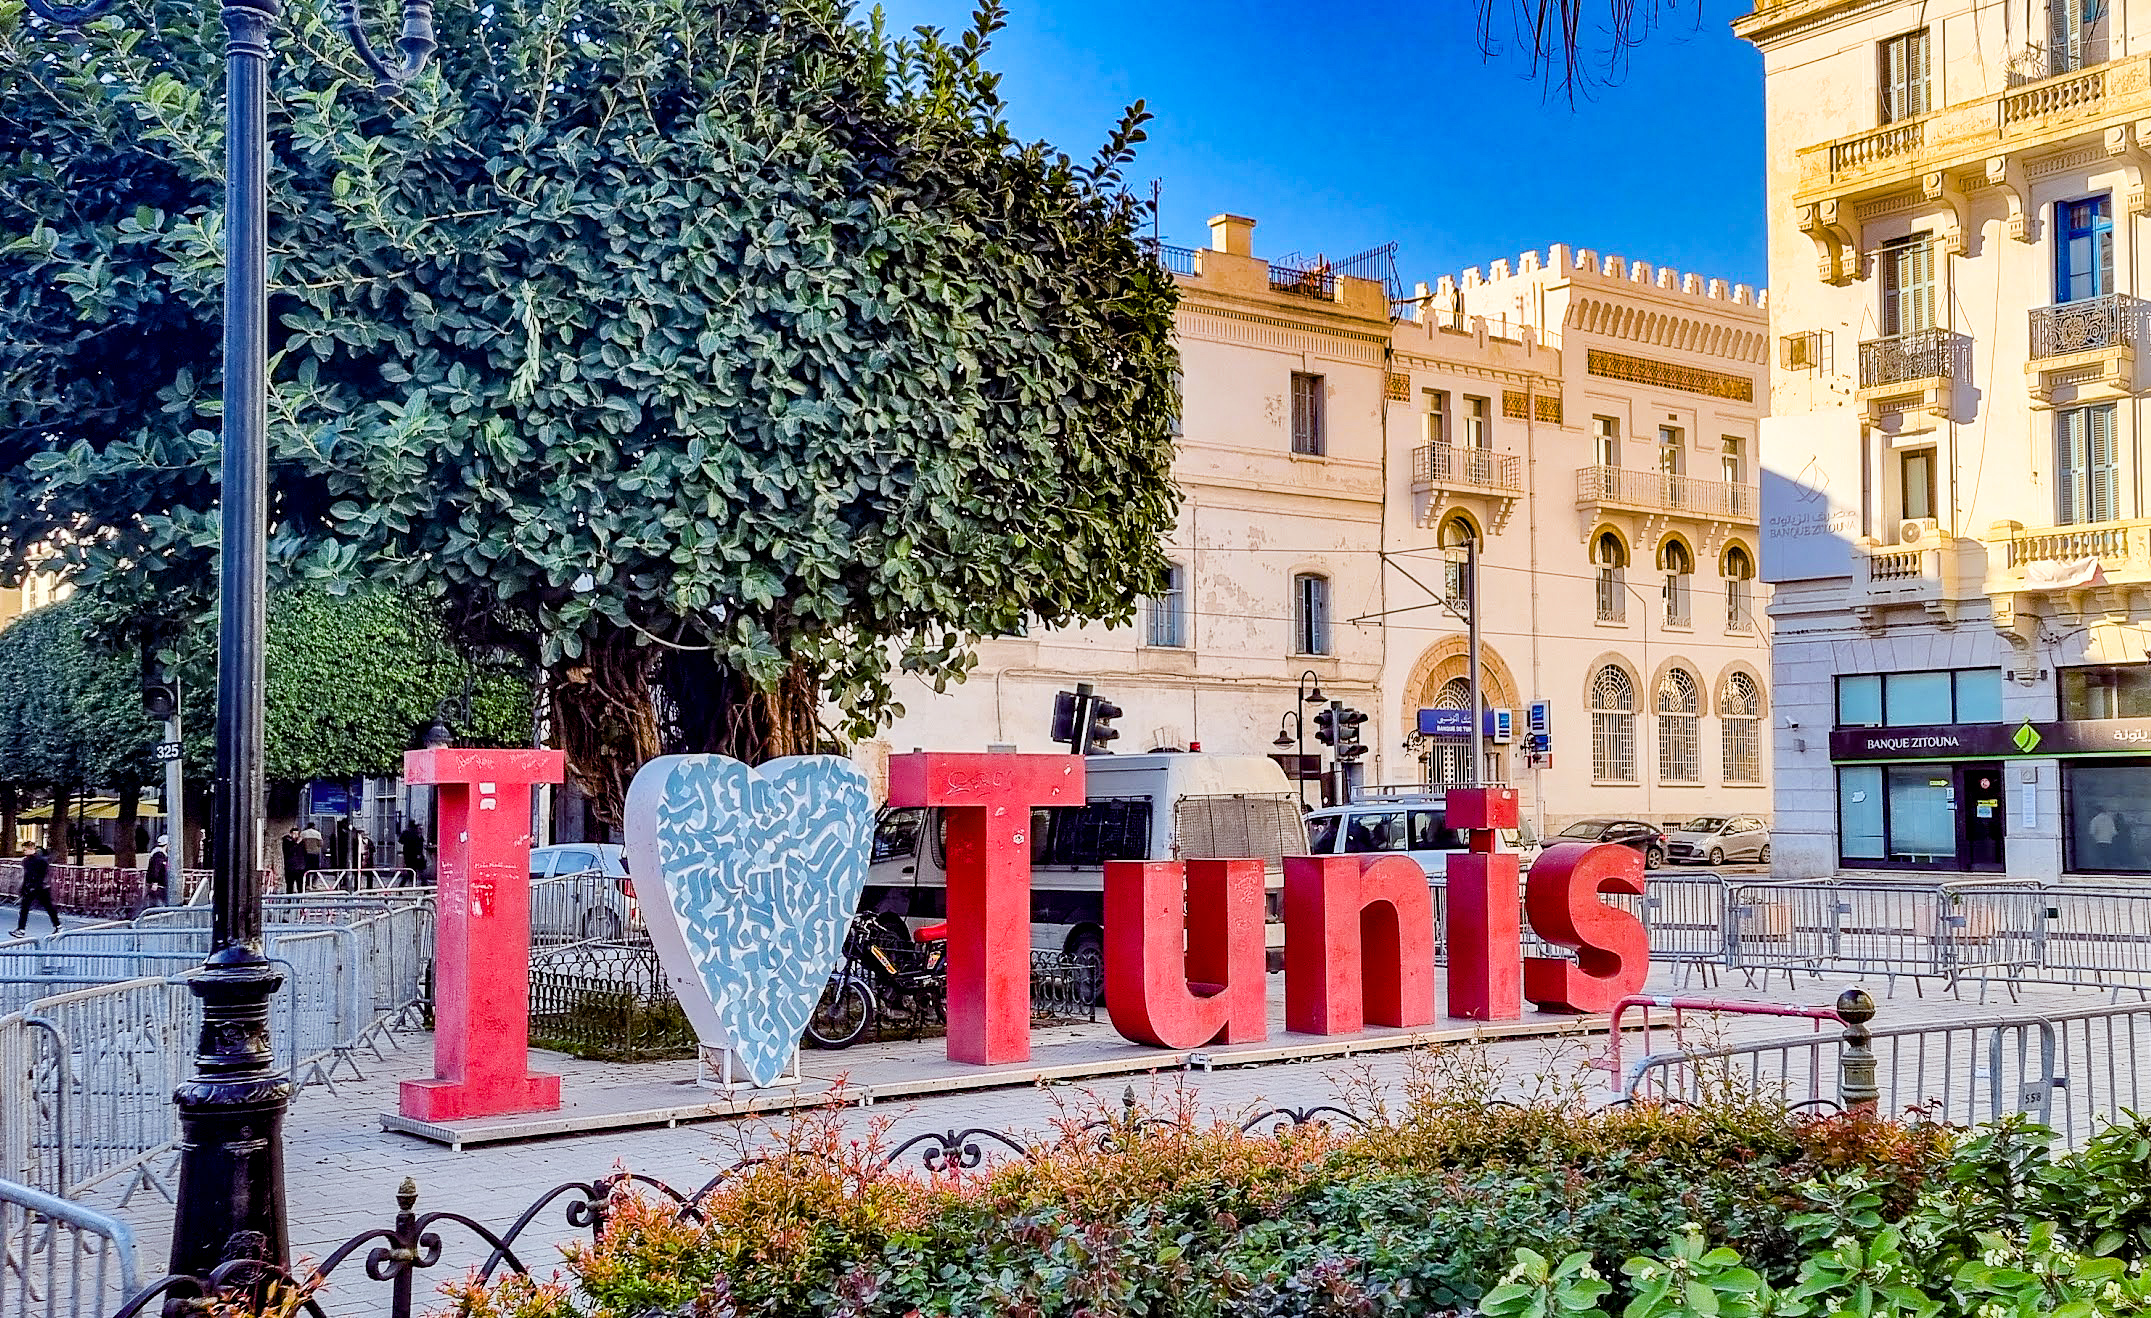 Your Perfect One Day Tunis Itinerary - Bardo, Bazaars and Bambalouni